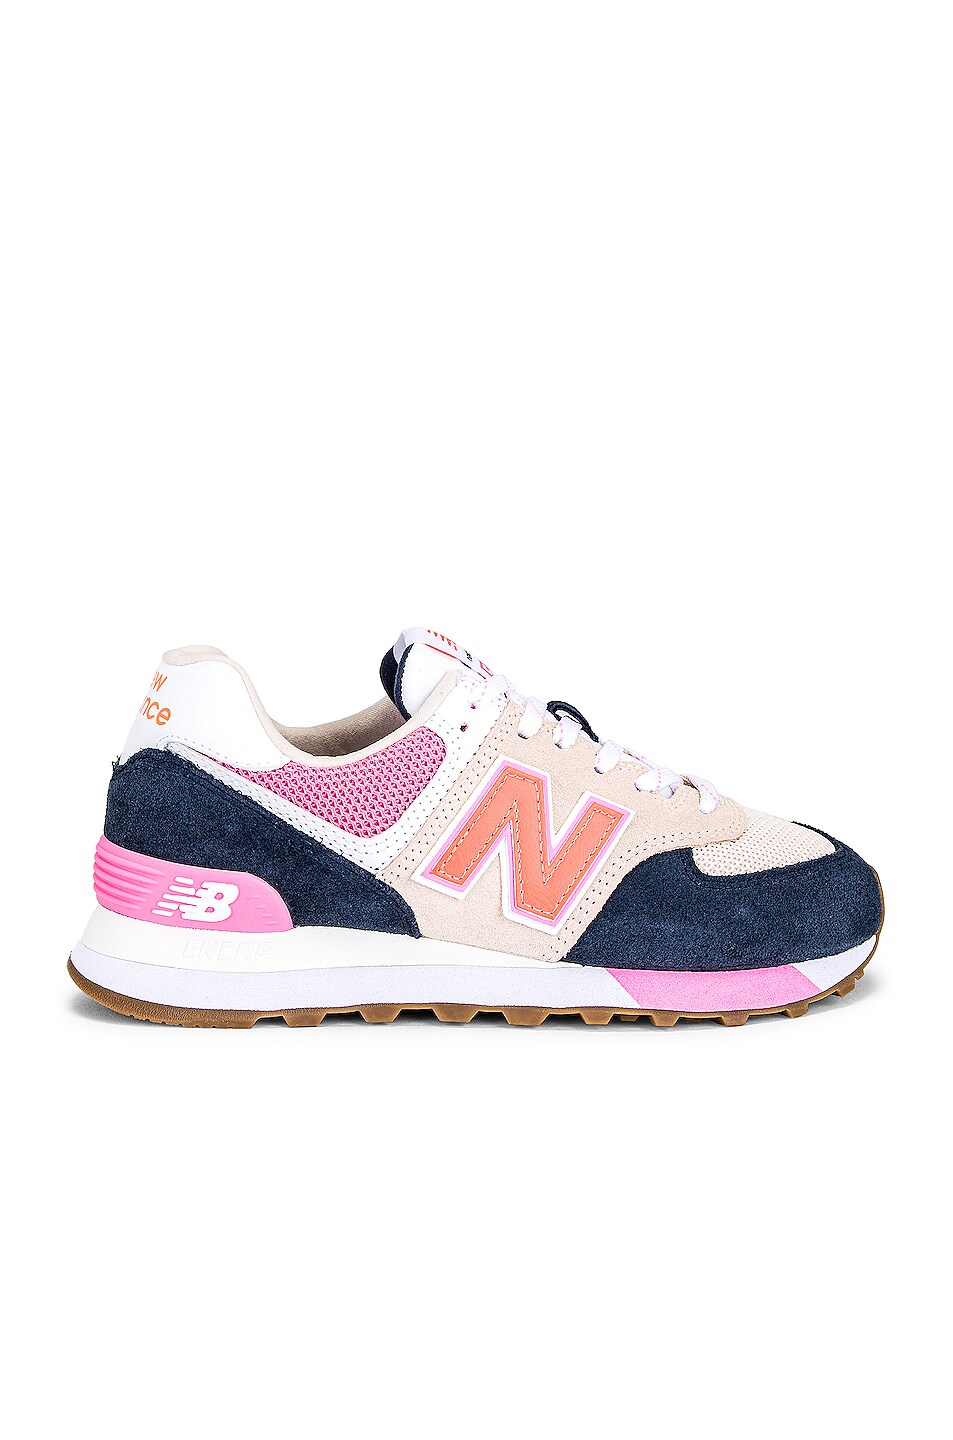 Image 1 of New Balance 574 Sneakers in Natural Indigo & Vintage Rose